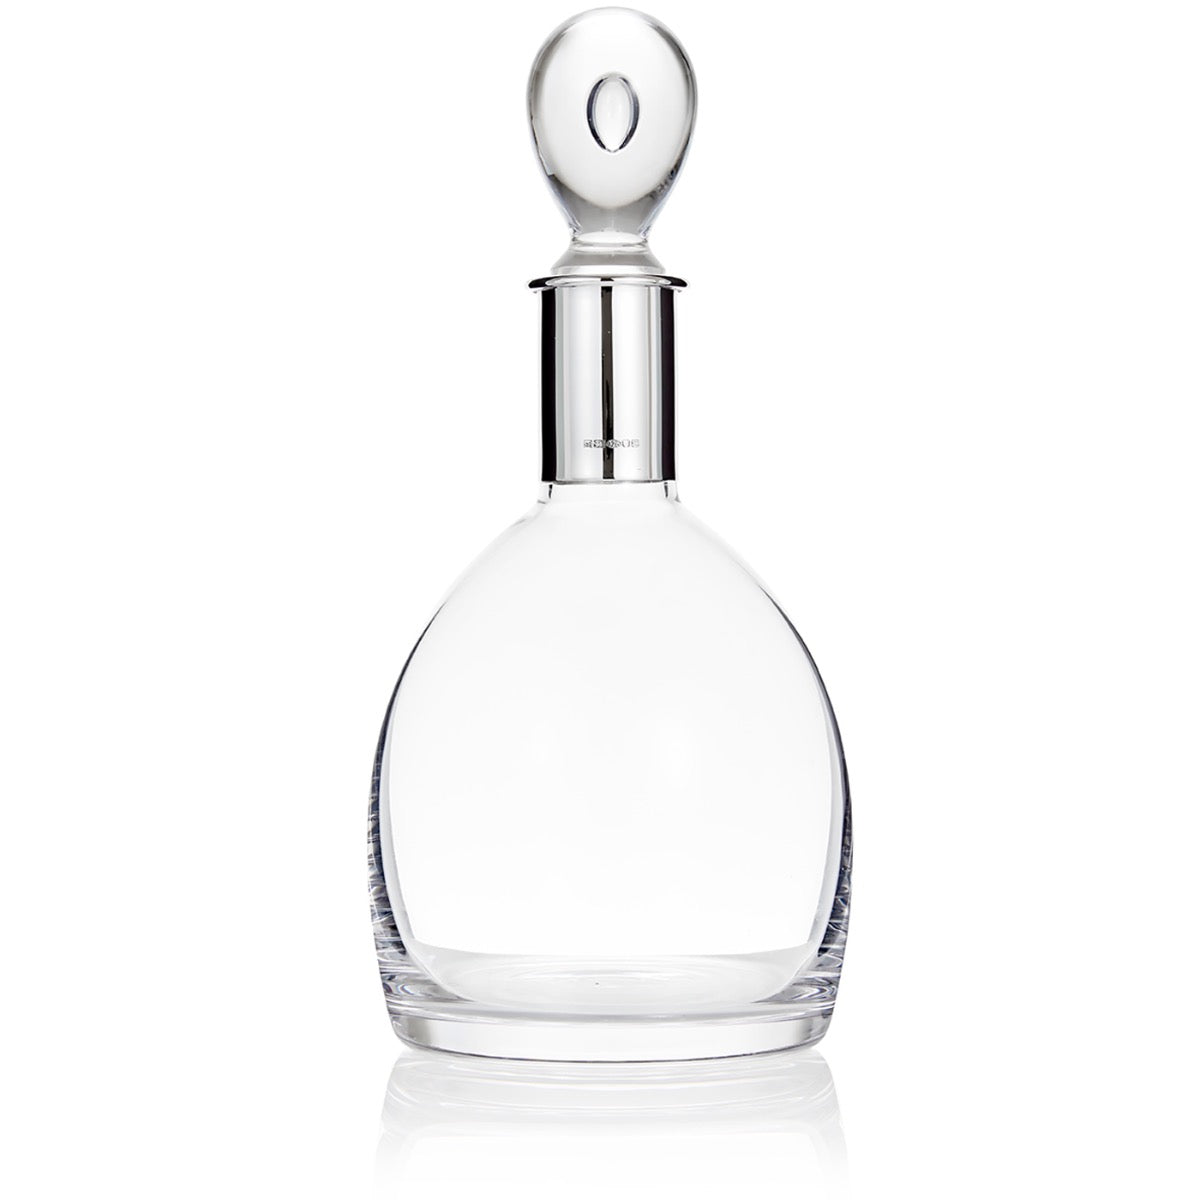 Silver and Crystal decanter No. 1 | Hersey & Son Silversmiths